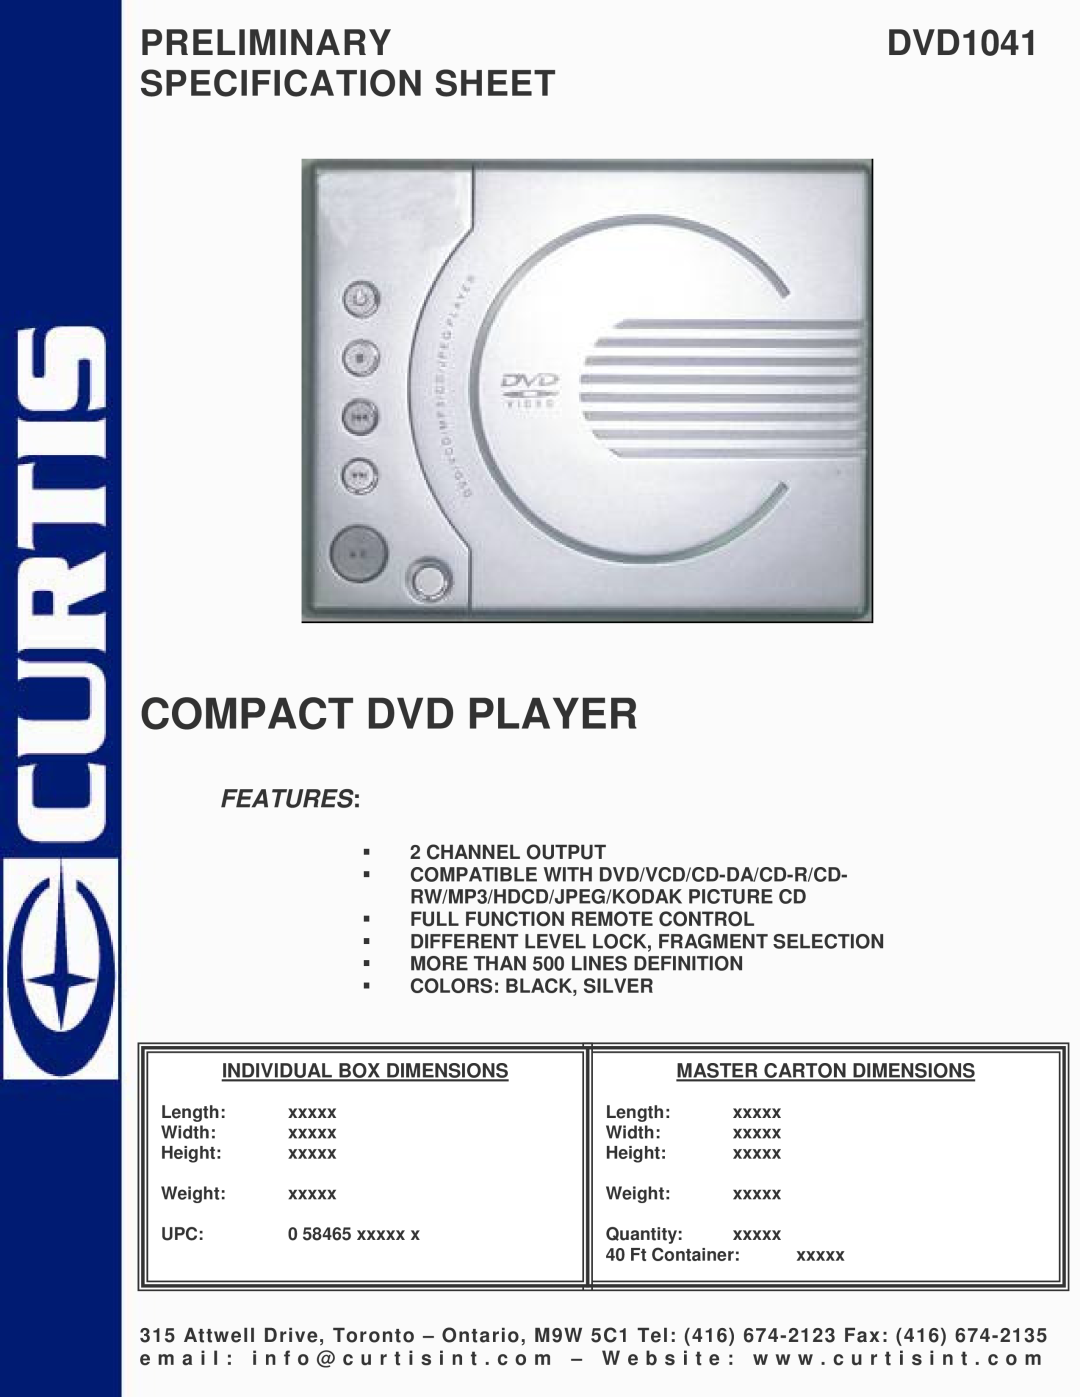 Curtis specifications Compact Dvd Player, PRELIMINARYDVD1041 SPECIFICATION SHEET, Features 